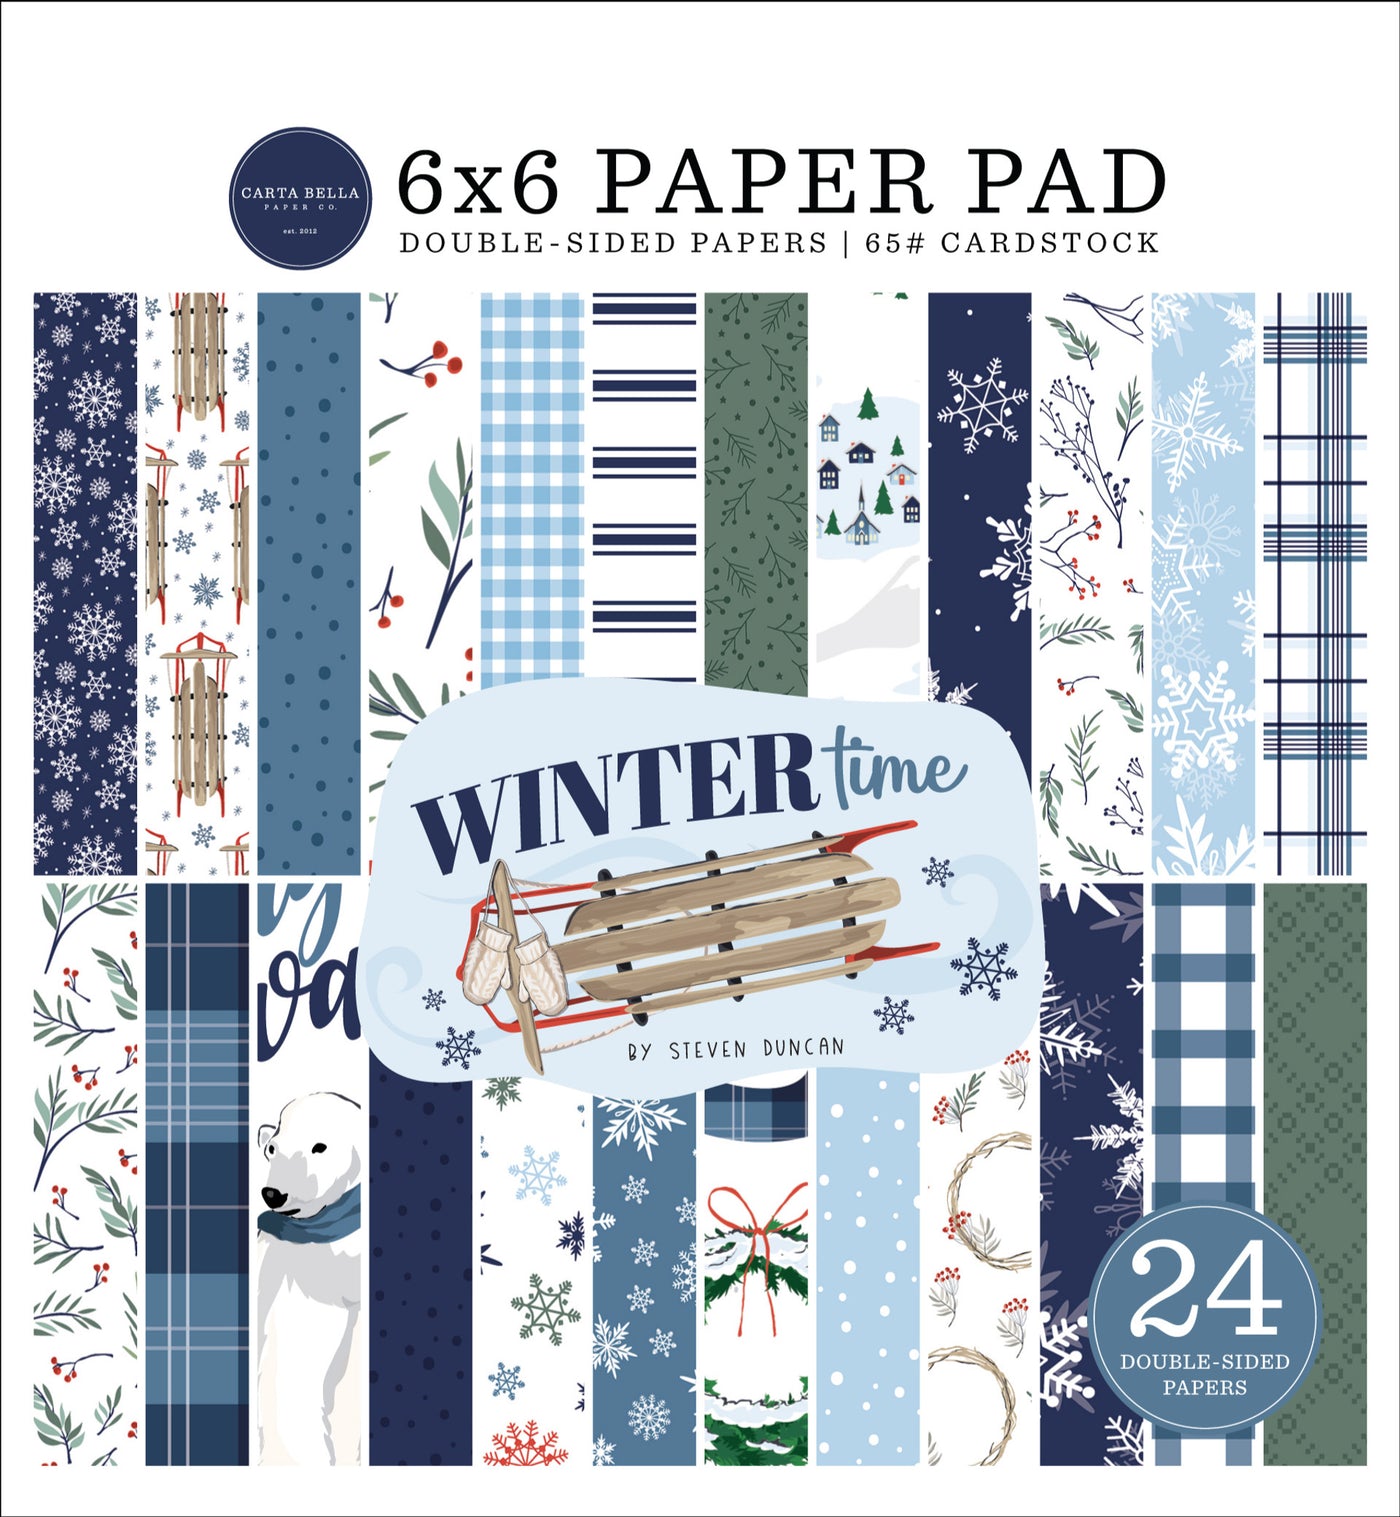 Trendy 6x6 pad with 24 double-sided sheets. Great for Christmas and winter card making and other seasonal craft projects. Matches Wintertime Collection.